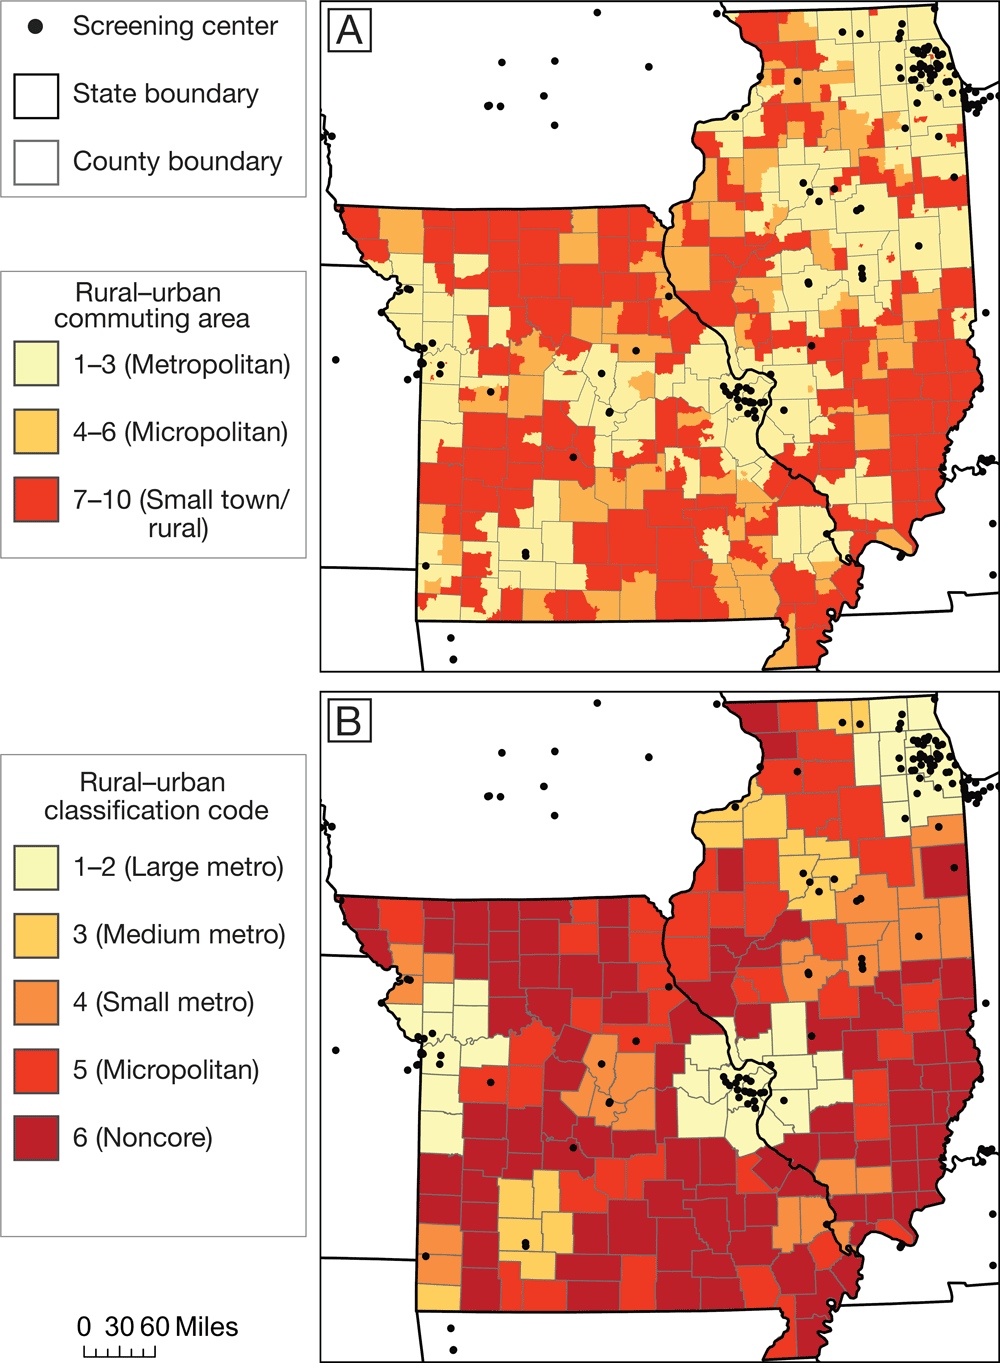 Measures of rurality in Missouri and Illinois and location of low-dose computed tomography screening centers. A, Rural–urban commuting area (RUCA) categories at the census tract level, determined by US Department of Agriculture Economic Research Service (16). B, National Center for Health Statistics (NCHS) rural–urban classification codes at the county level (17). Data on screening centers obtained from American College of Radiology (11) and GO2 Foundation for Lung Cancer (12). Shapefiles obtained from ESRI (20).